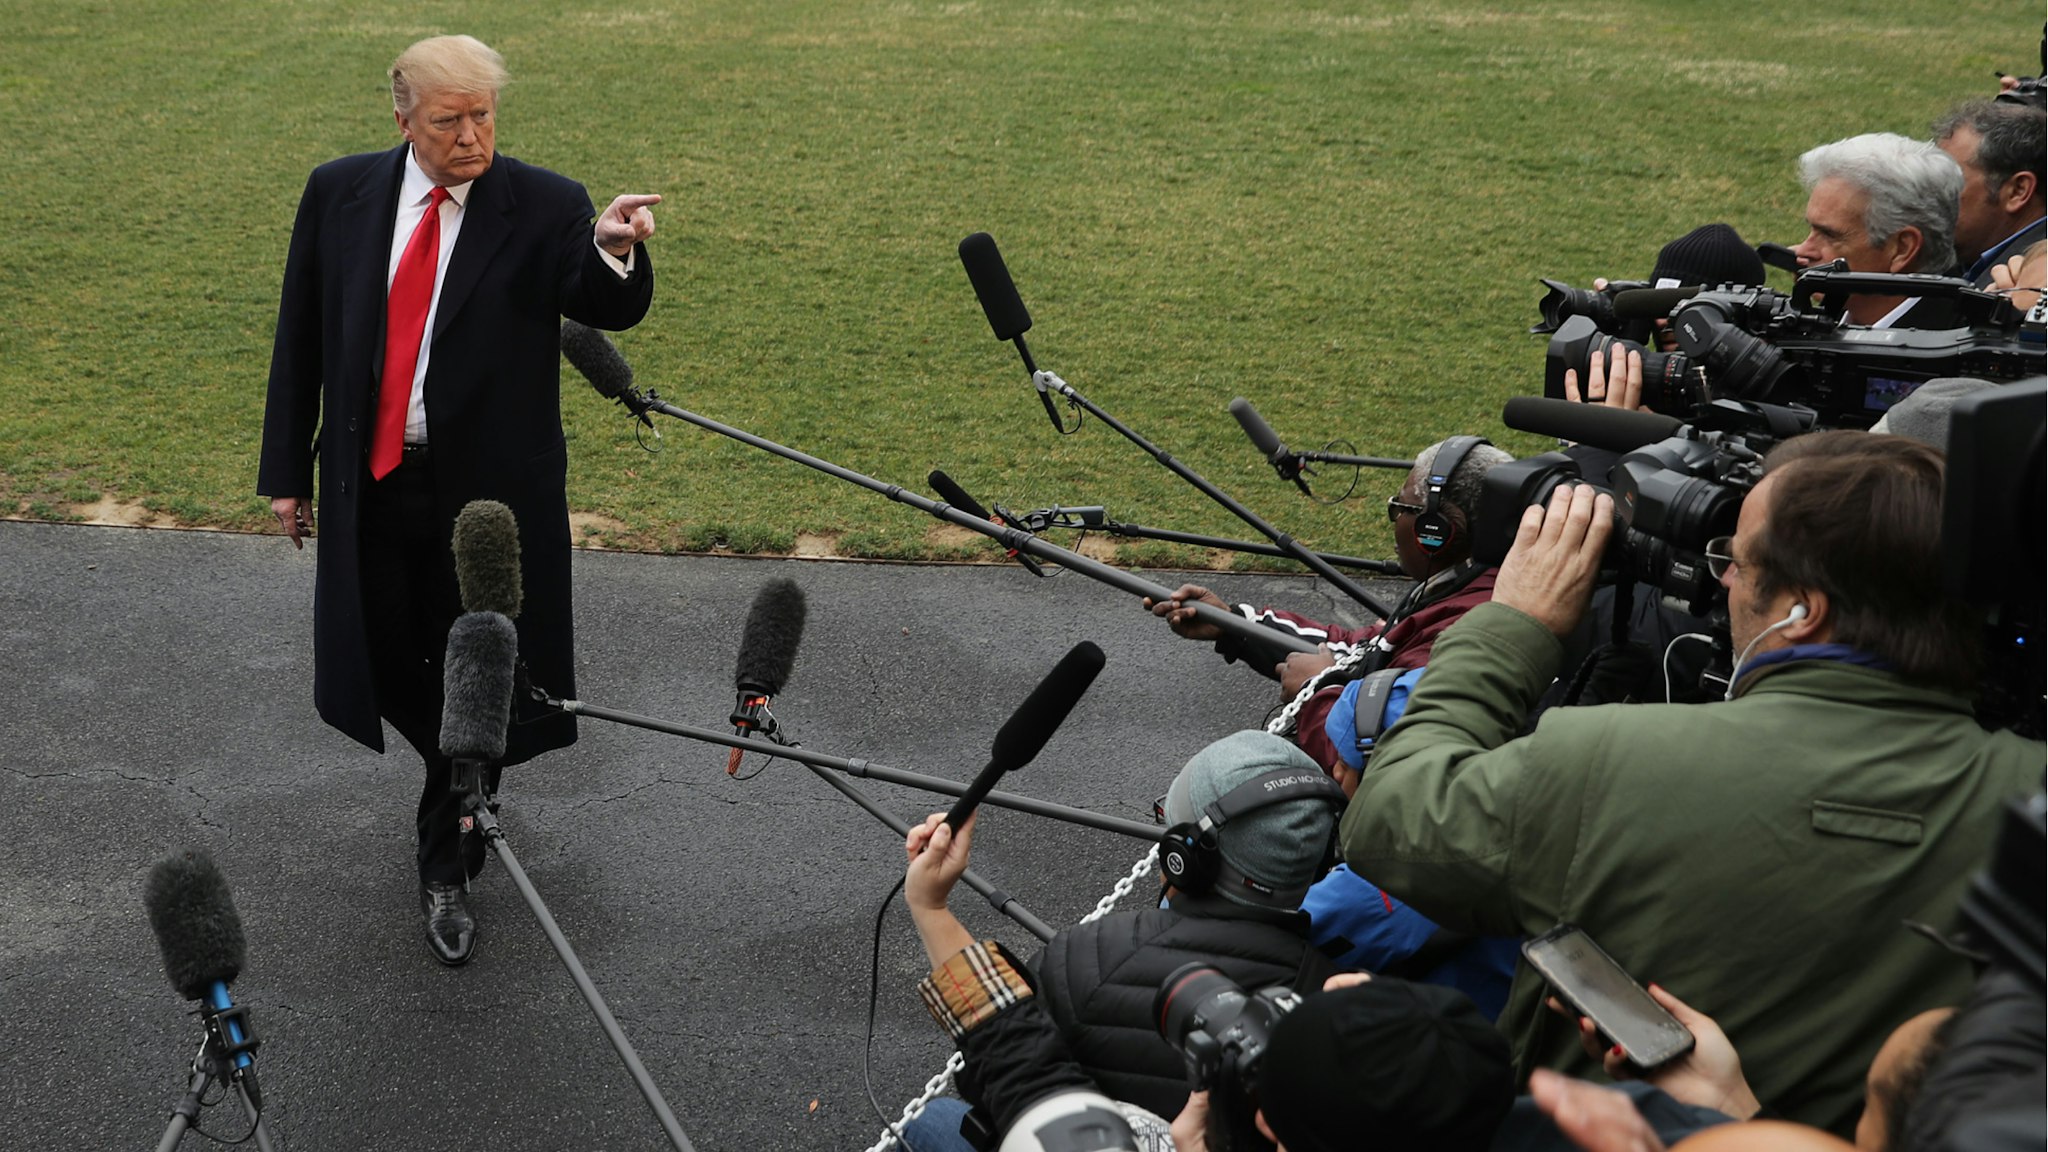 U.S. President Donald Trump talks to reporters before departing the White House March 22, 2019 in Washington, DC.